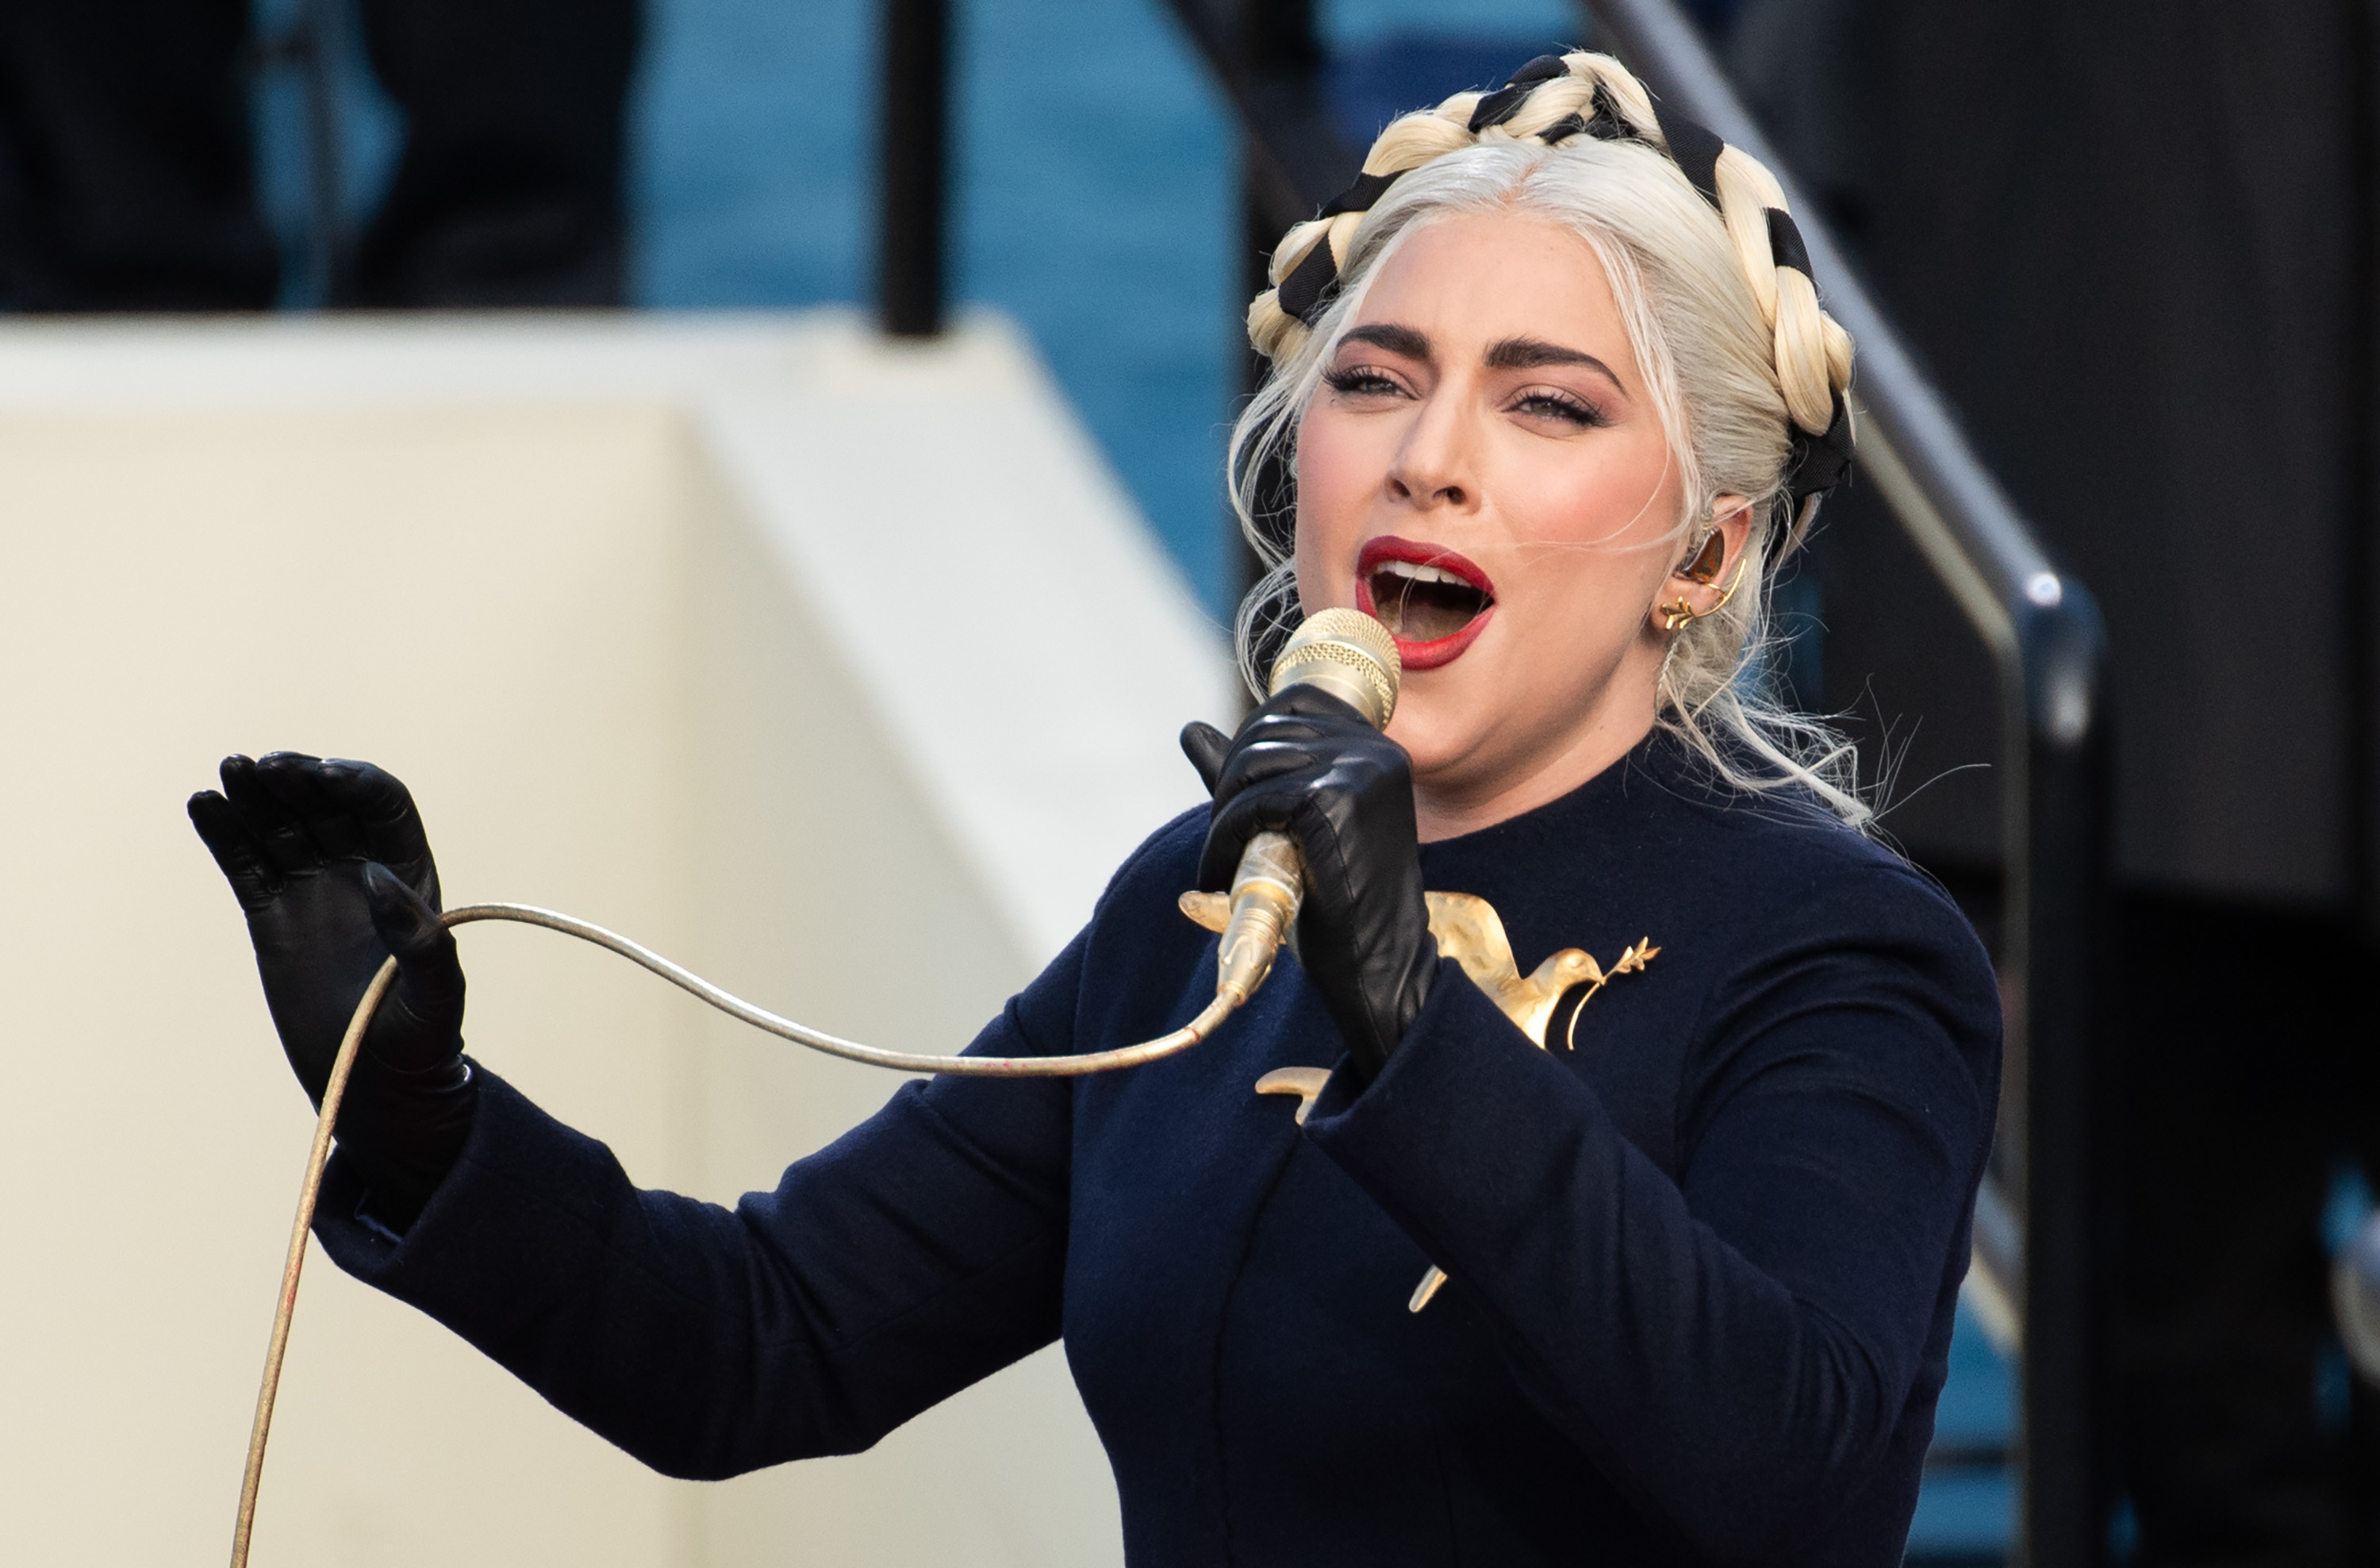 Inauguration 2021 Watch All the Performances from Lady Gaga, Foo